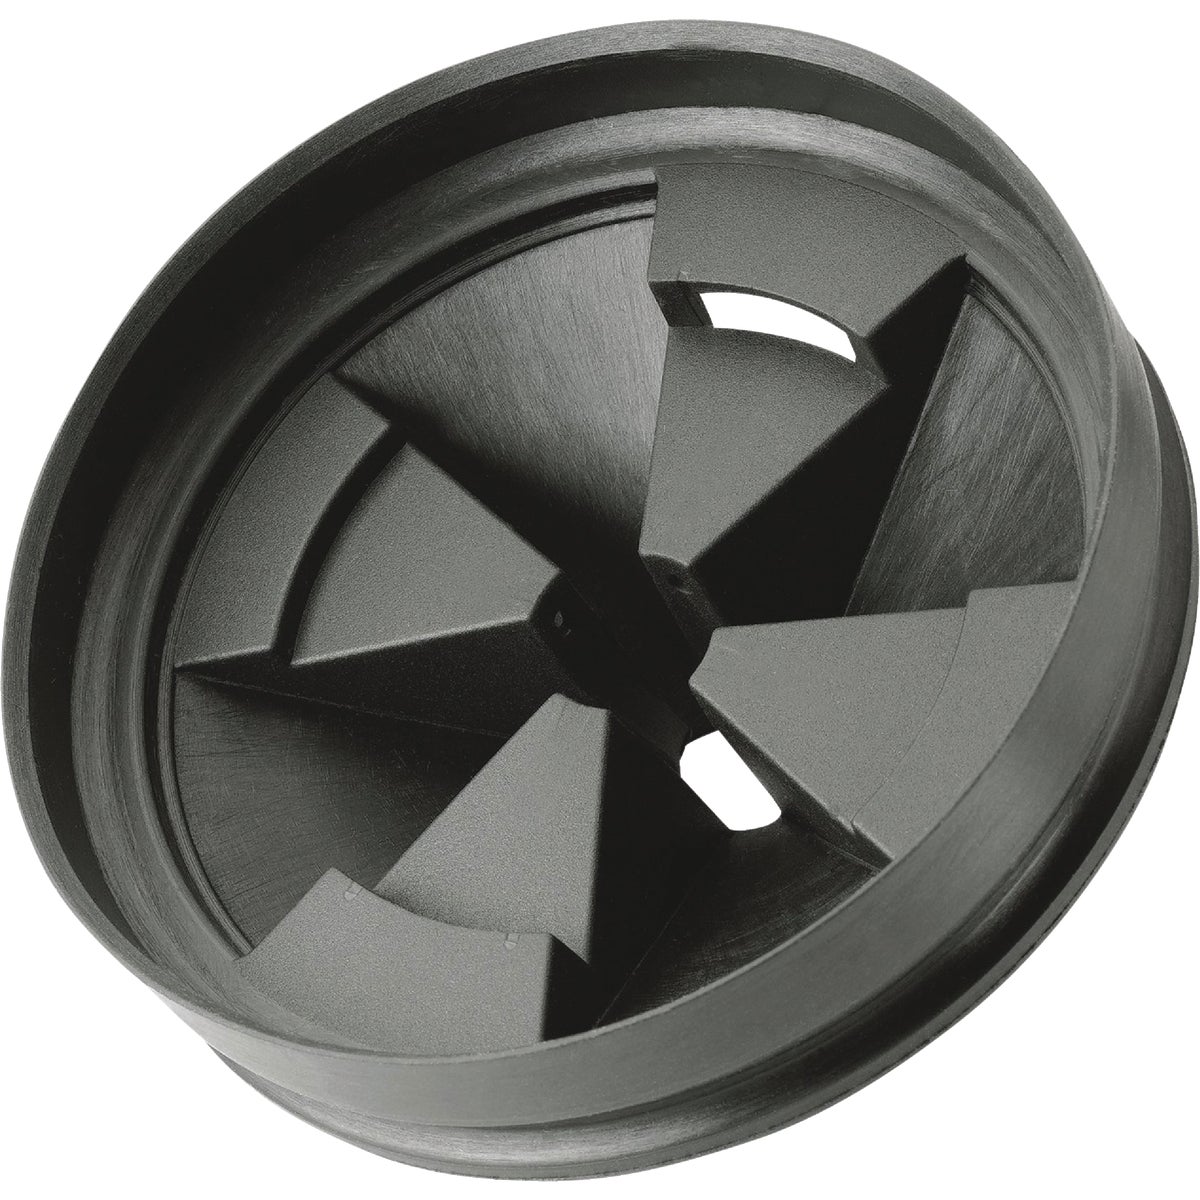 Item 450130, Replacement sink baffle for evolution series disposers.